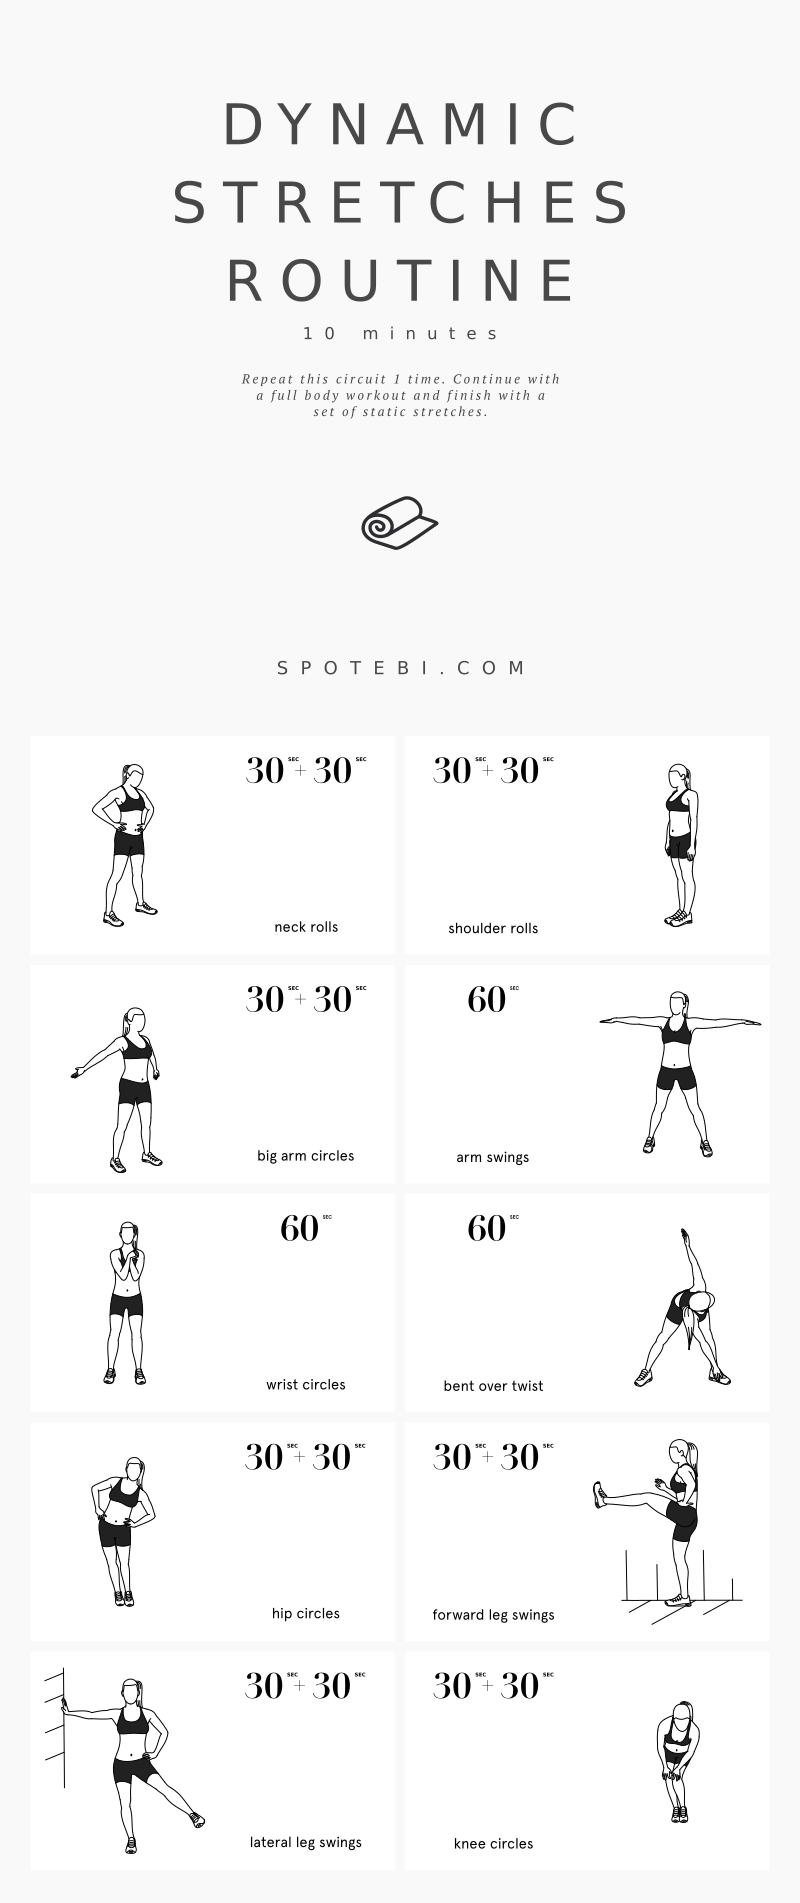 Increase your flexibility with this set of dynamic stretching exercises. A 10 minute routine for women with music playlist, calorie calculator and timer. https://www.spotebi.com/workout-routines/flexibility-exercises-dynamic-stretching-routine-for-women/